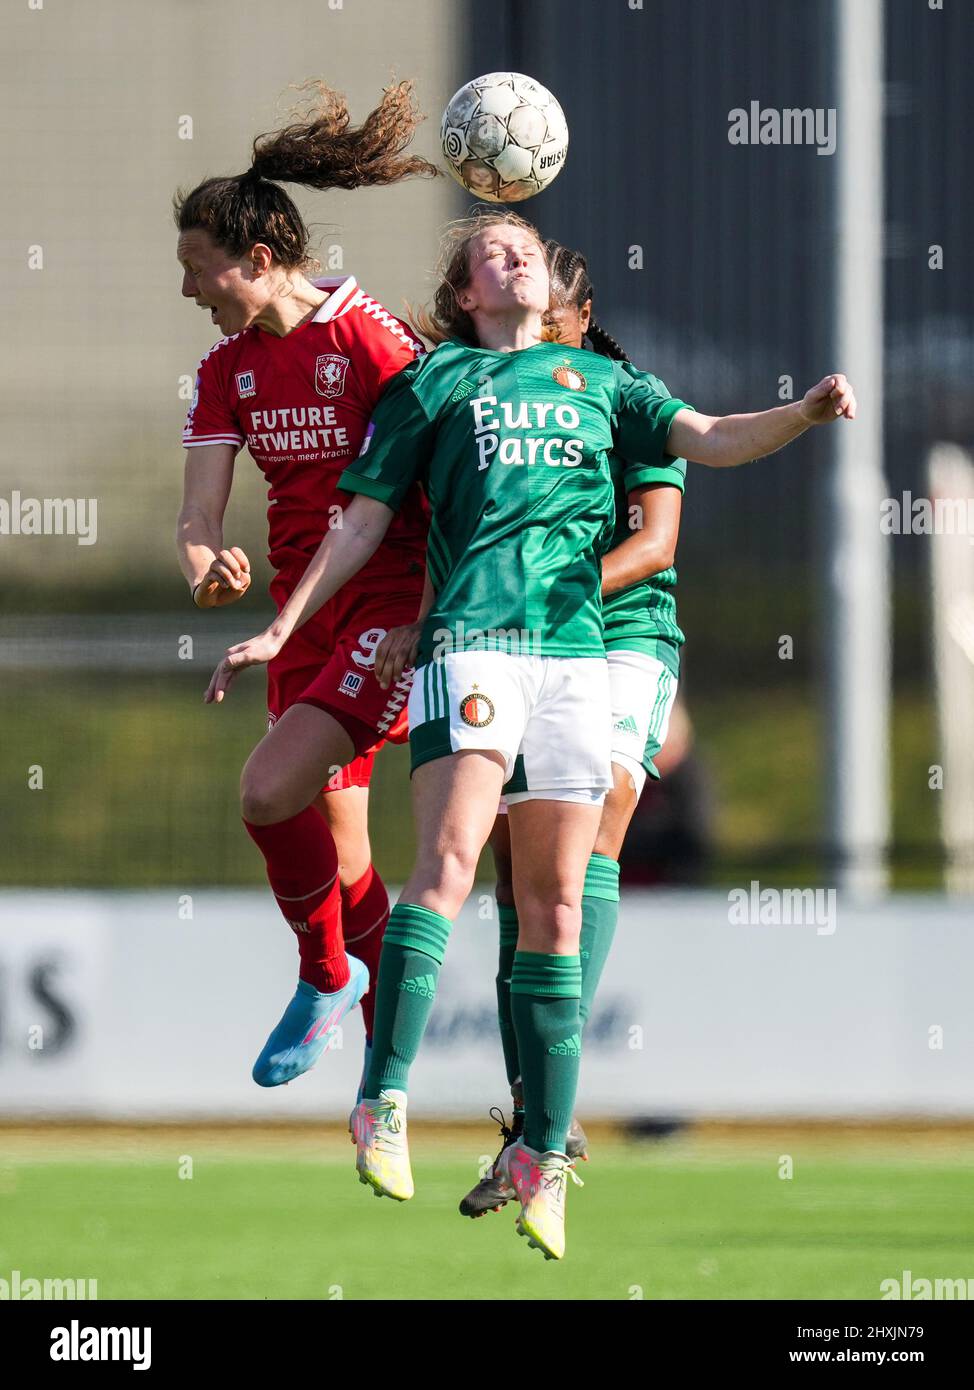 Enschede - Fenna Kalma of FC Twente Vrouwen, Manique de Vette of Feyenoord V1 during the match between FC Twente V1 v Feyenoord V1 at Sportcampus Diekman on 13 March 2022 in Enschede, Netherlands. (Box to Box Pictures/Yannick Verhoeven) Stock Photo